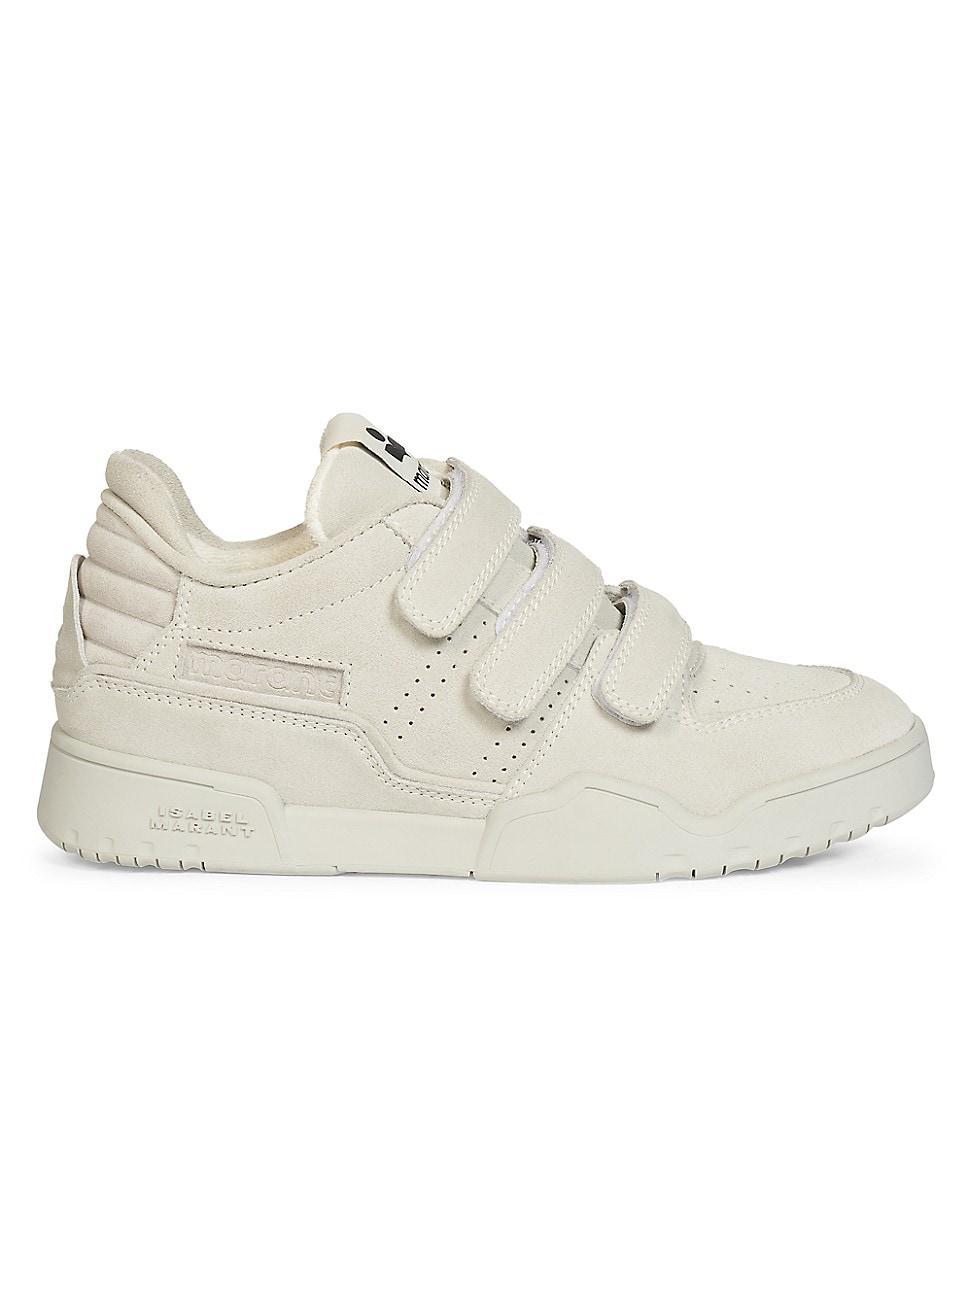 Isabel Marant Oney Low Top Sneaker Product Image